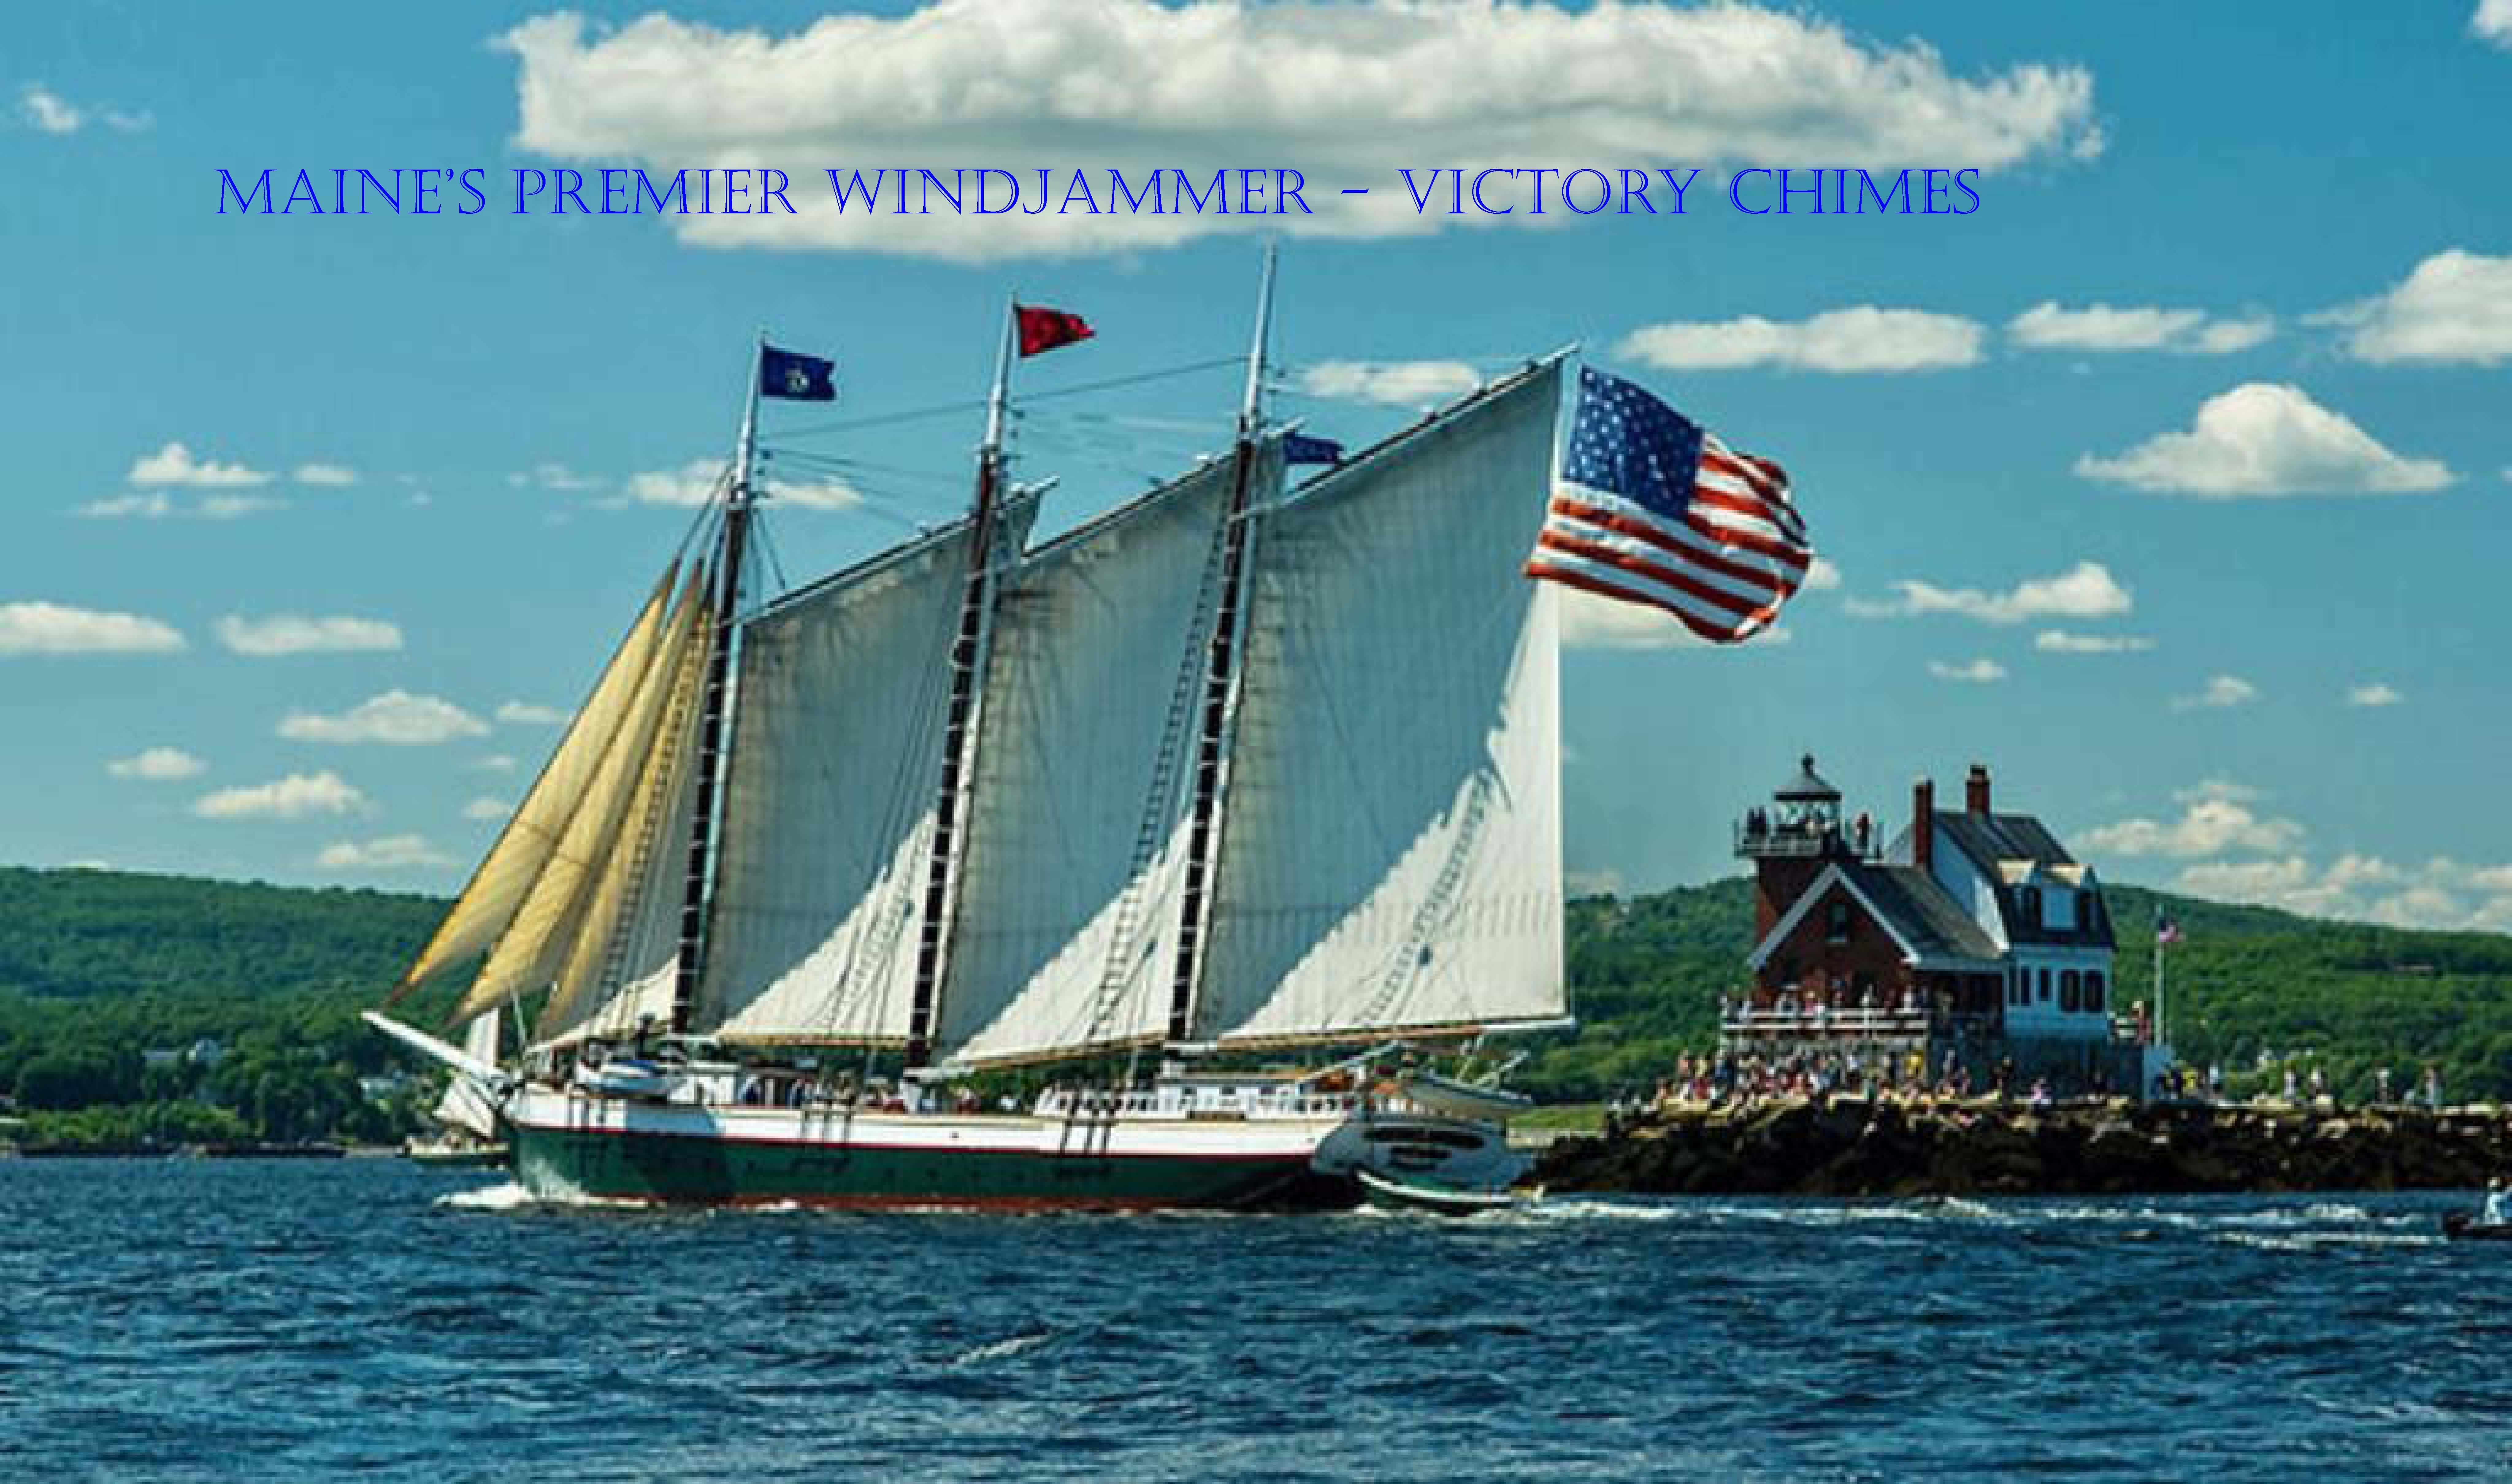 Historic 3-Masted Wooden Schooner k/a Victory Chimes - O/N #136784  Auction